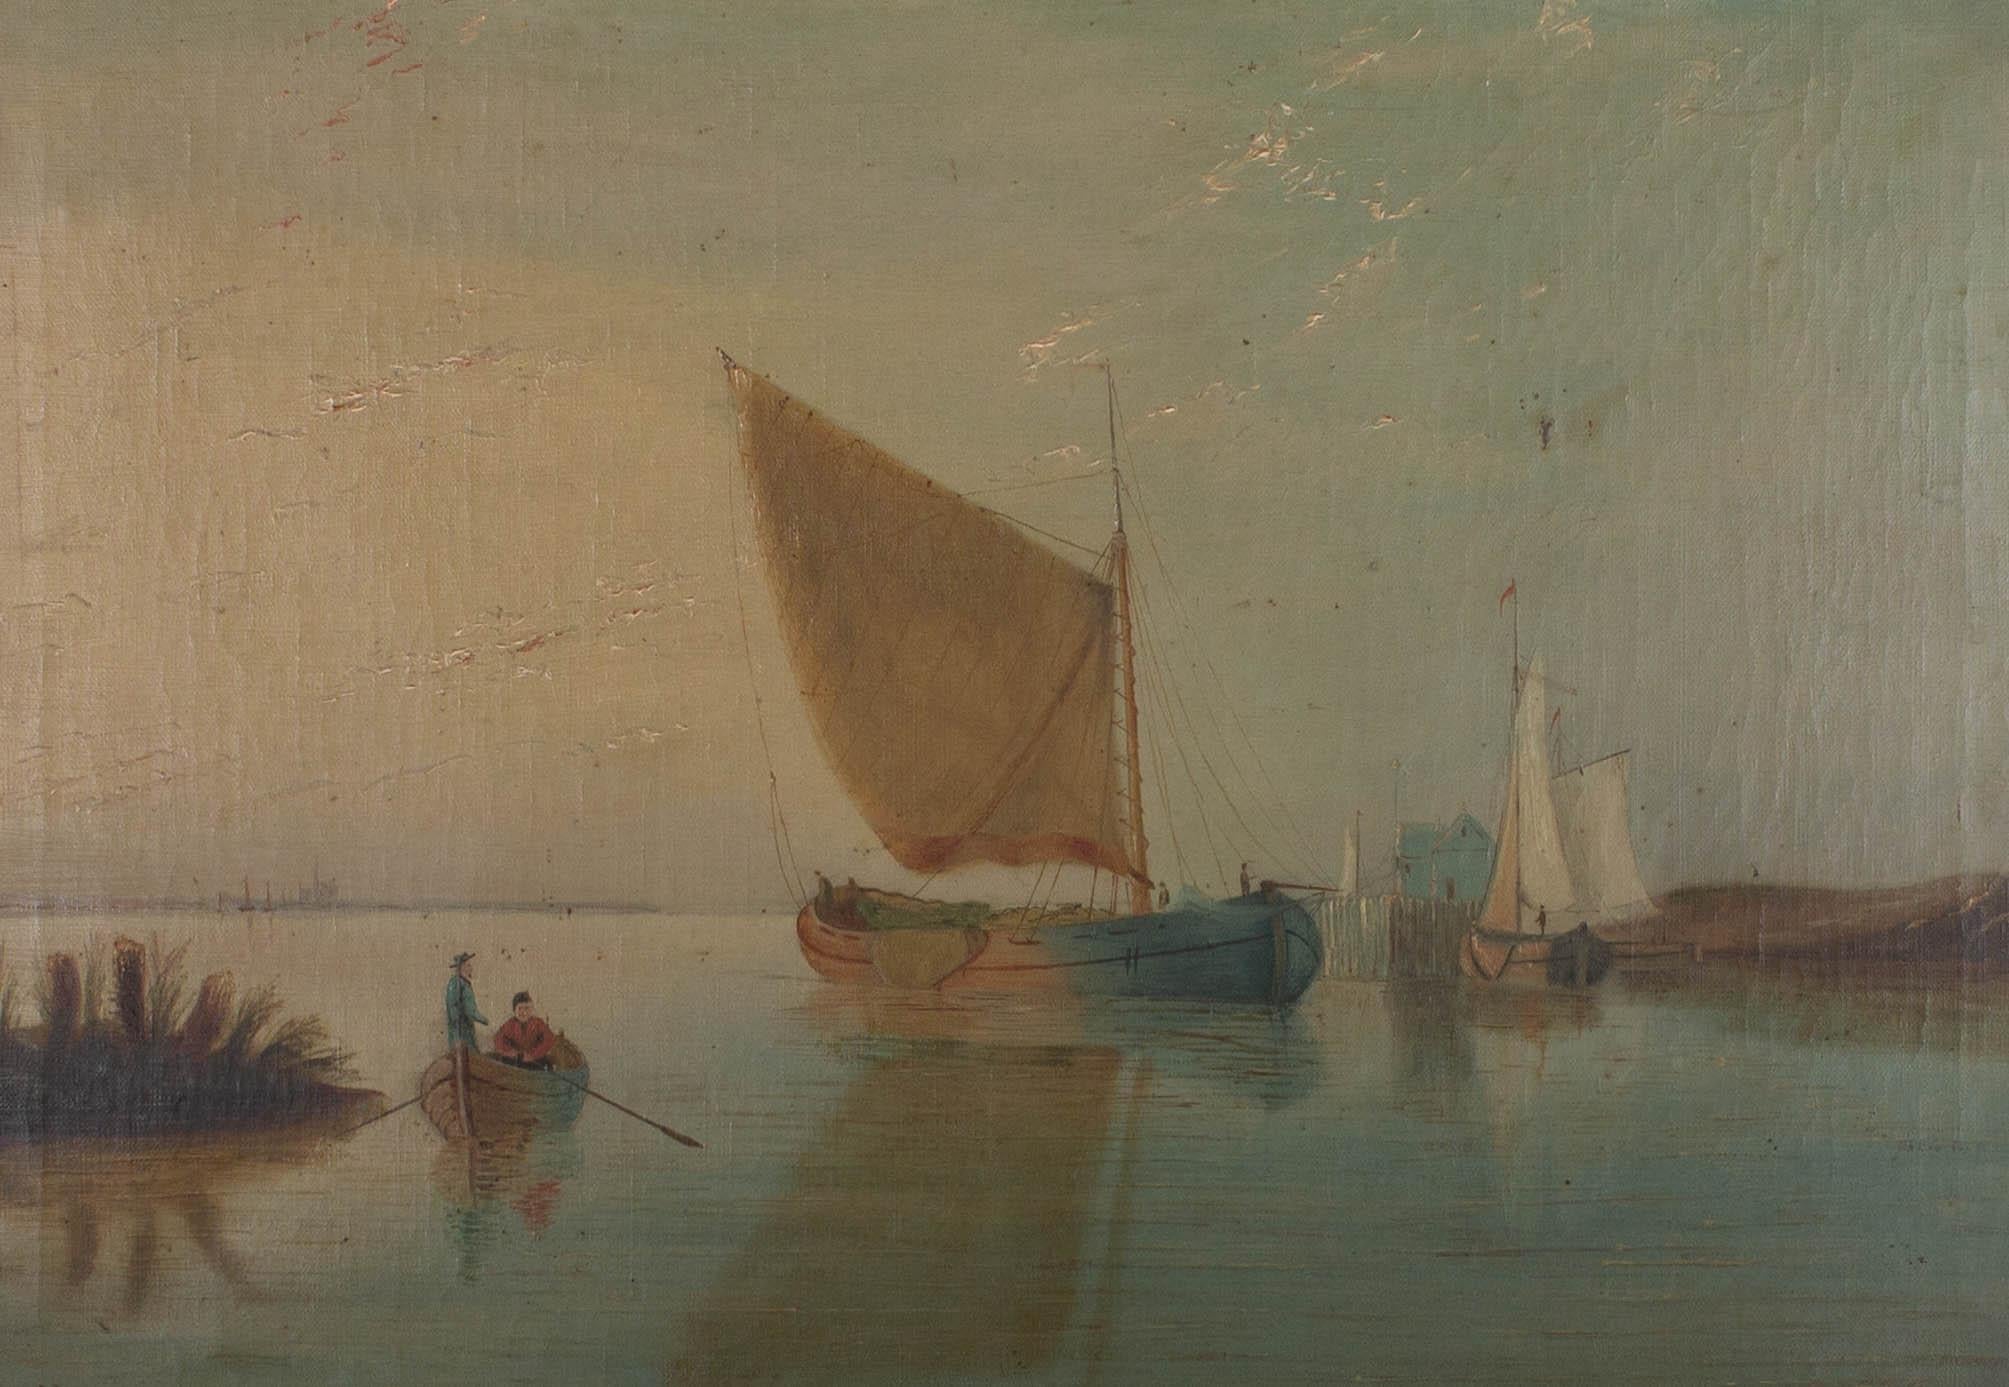 A fine nautical oil of a gaff rigged sloop, moored in an estuary. Two figures man a rowing boat at the lower left and the artist has signed and dated to the lower left corner. The painting has been finely presented in an early 20th Century gilt